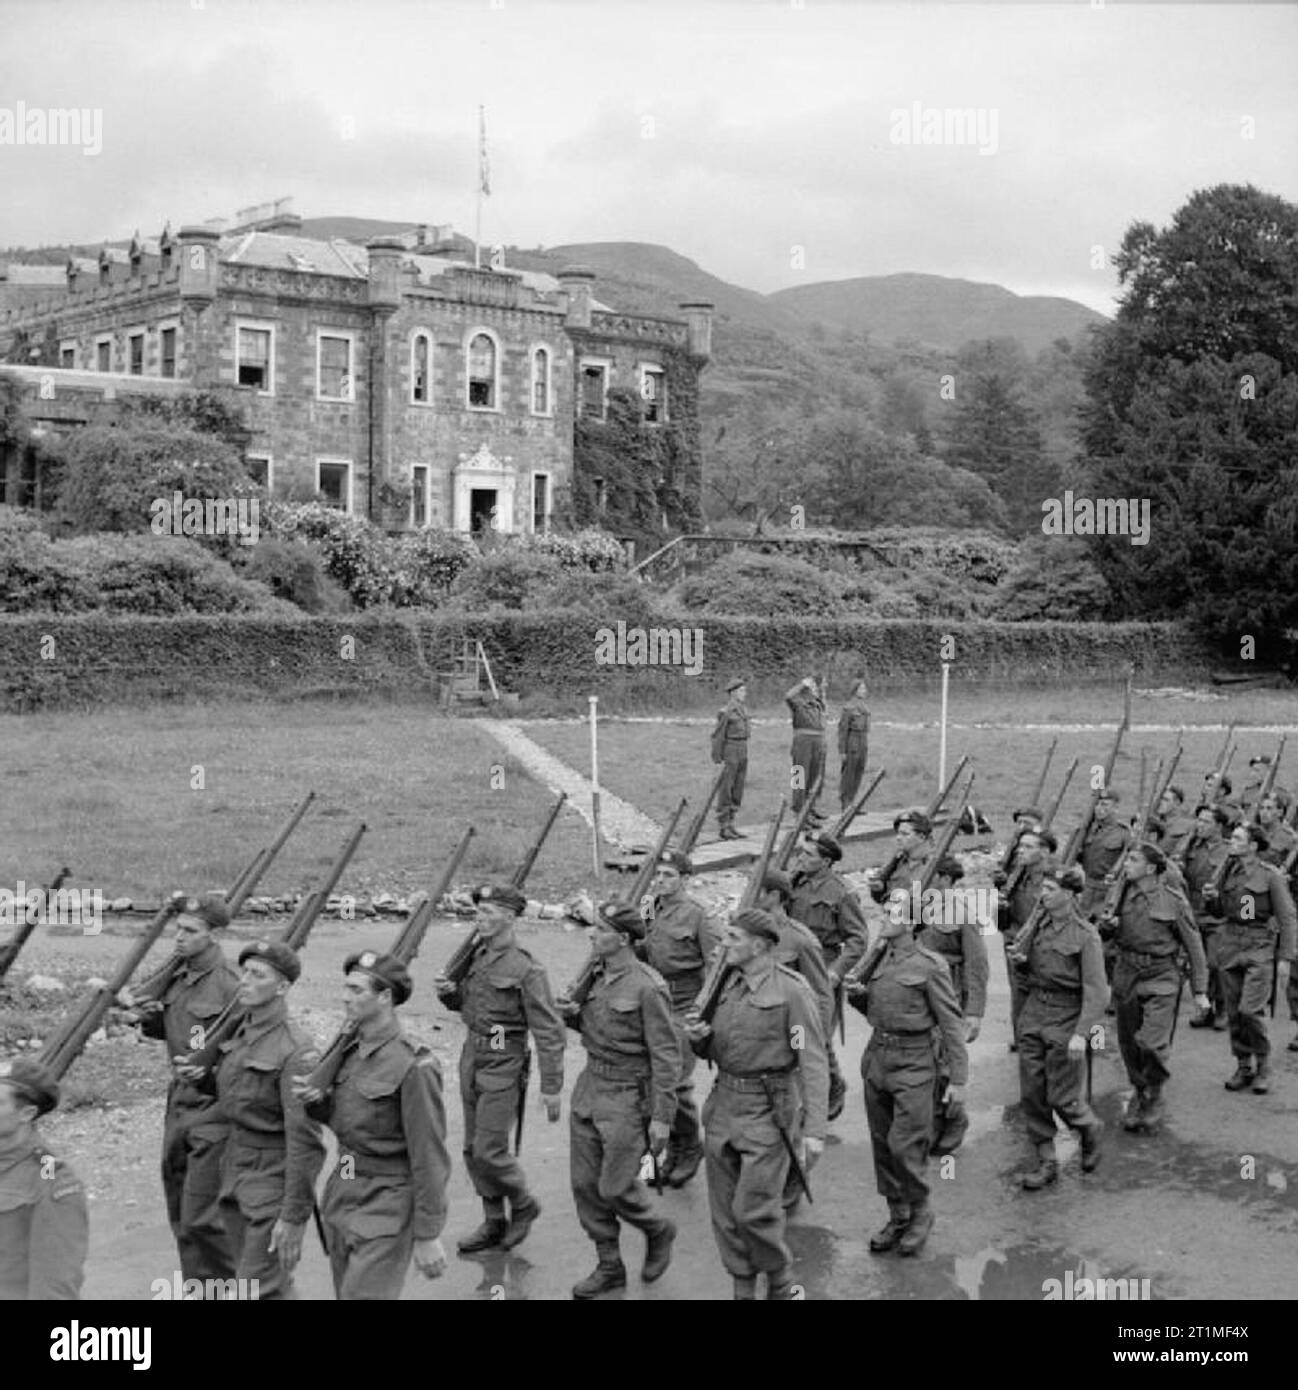 The Free French Army in the United Kingdom 1939-1945 French commando troops undergoing training at Achnacarry House in Scotland: Free French troops, headed by the Commando Depot Pipe Band, march past the Commandant, who is seen taking the salute, with the Free French flag flying from Achnacarry House in the background. Stock Photo